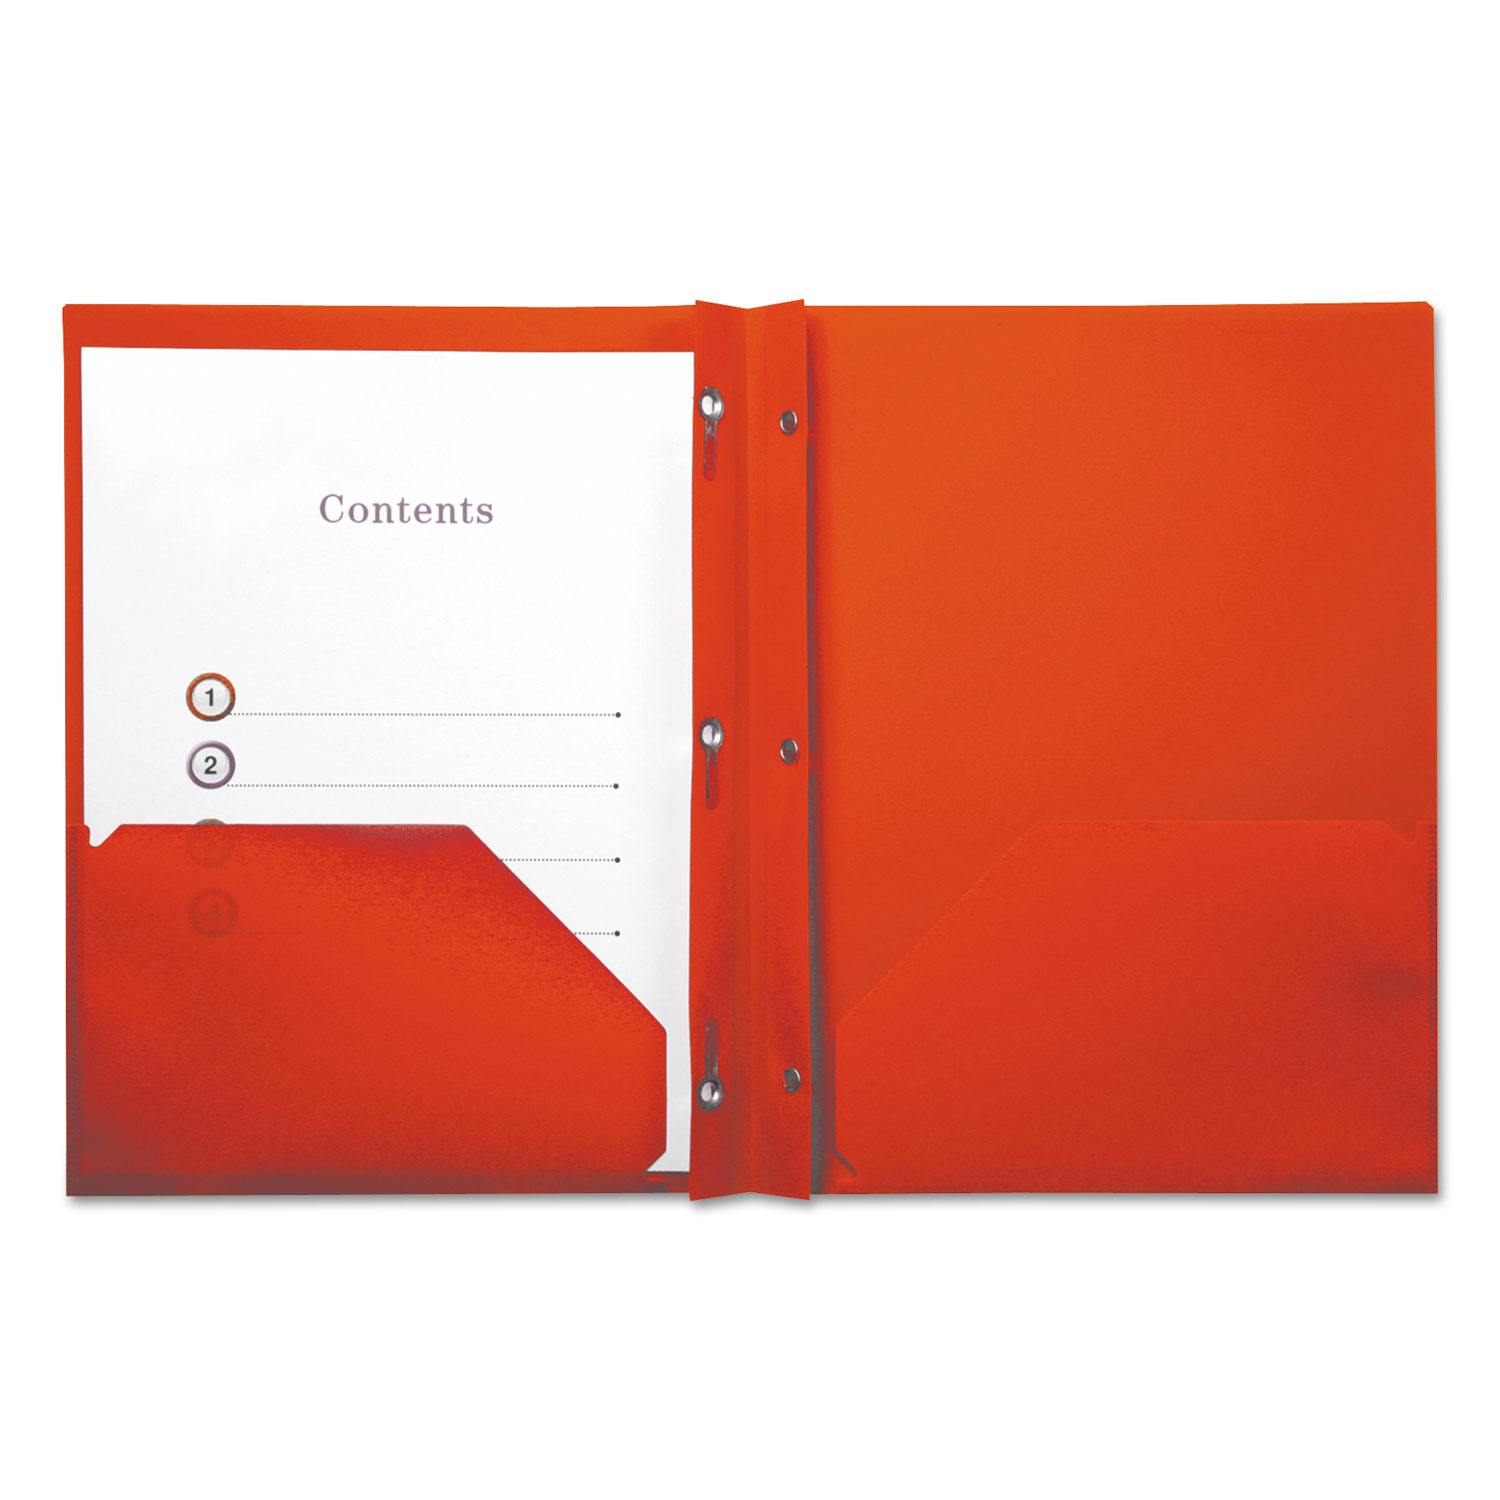  Universal UNV20553 Plastic Twin-Pocket Report Covers with 3 Fasteners, 100 Sheets, Red, 10/PK (UNV20553) 